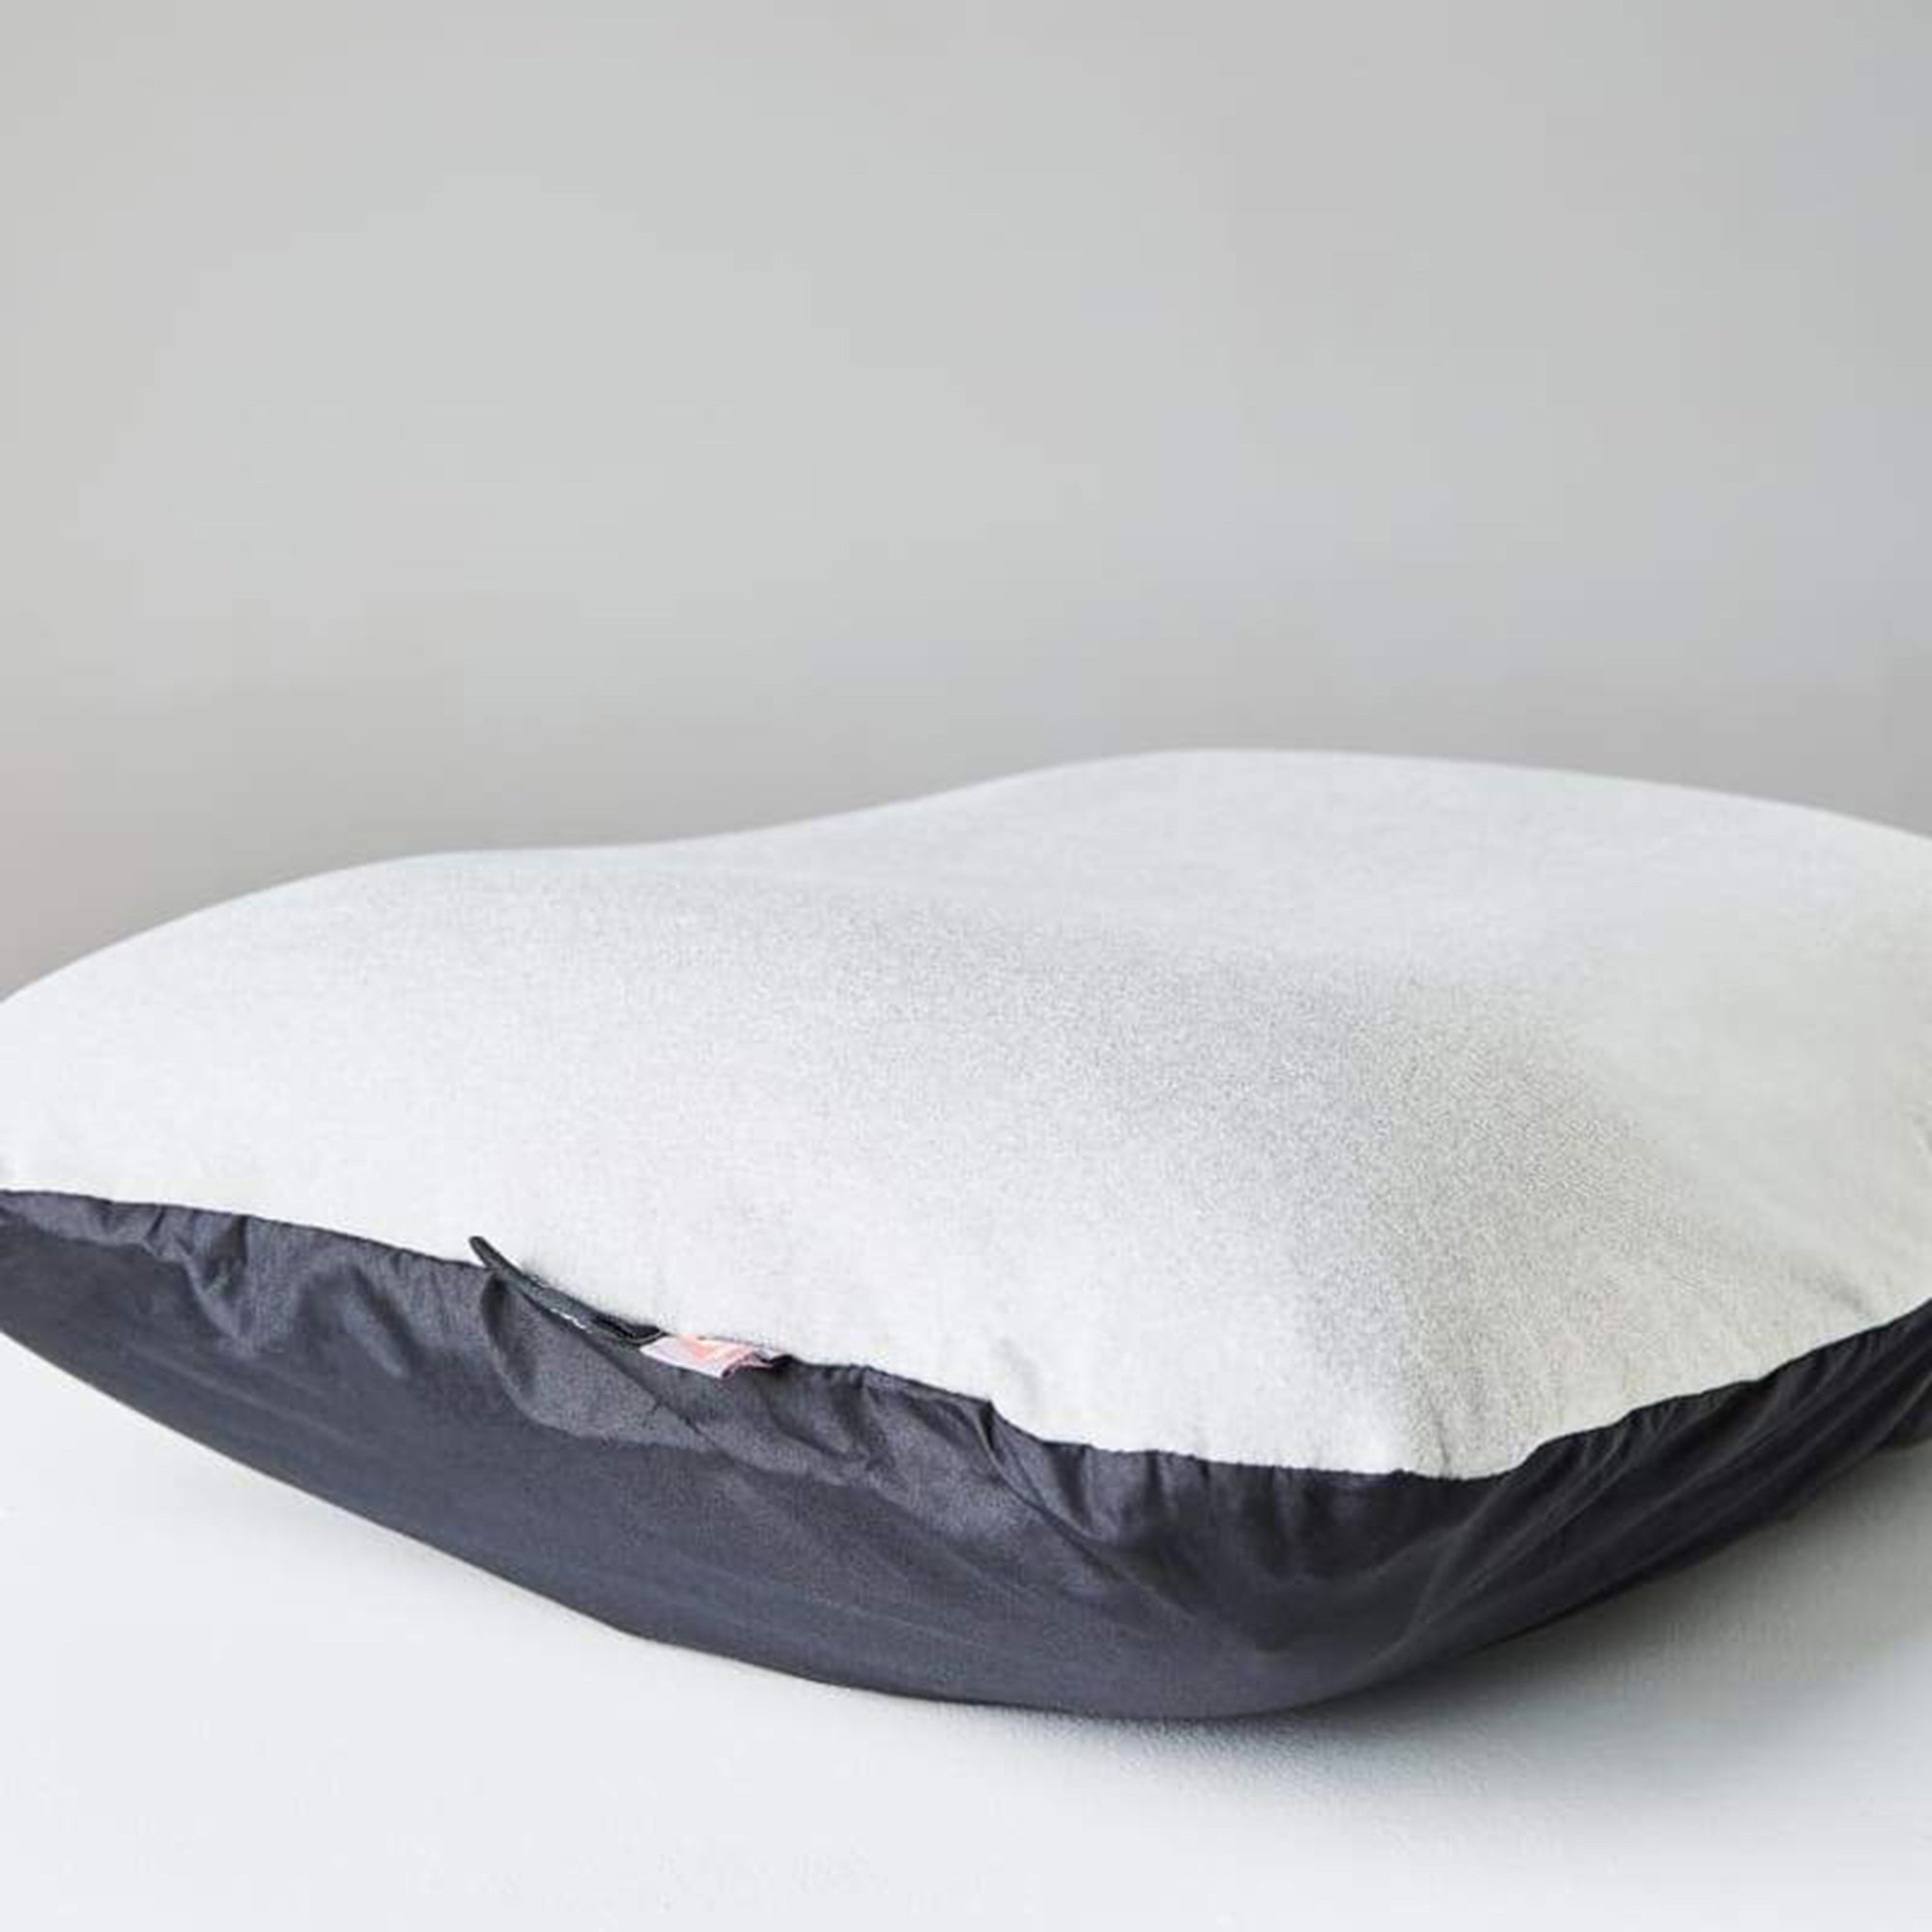 Camp Cradle Insulated Pillow